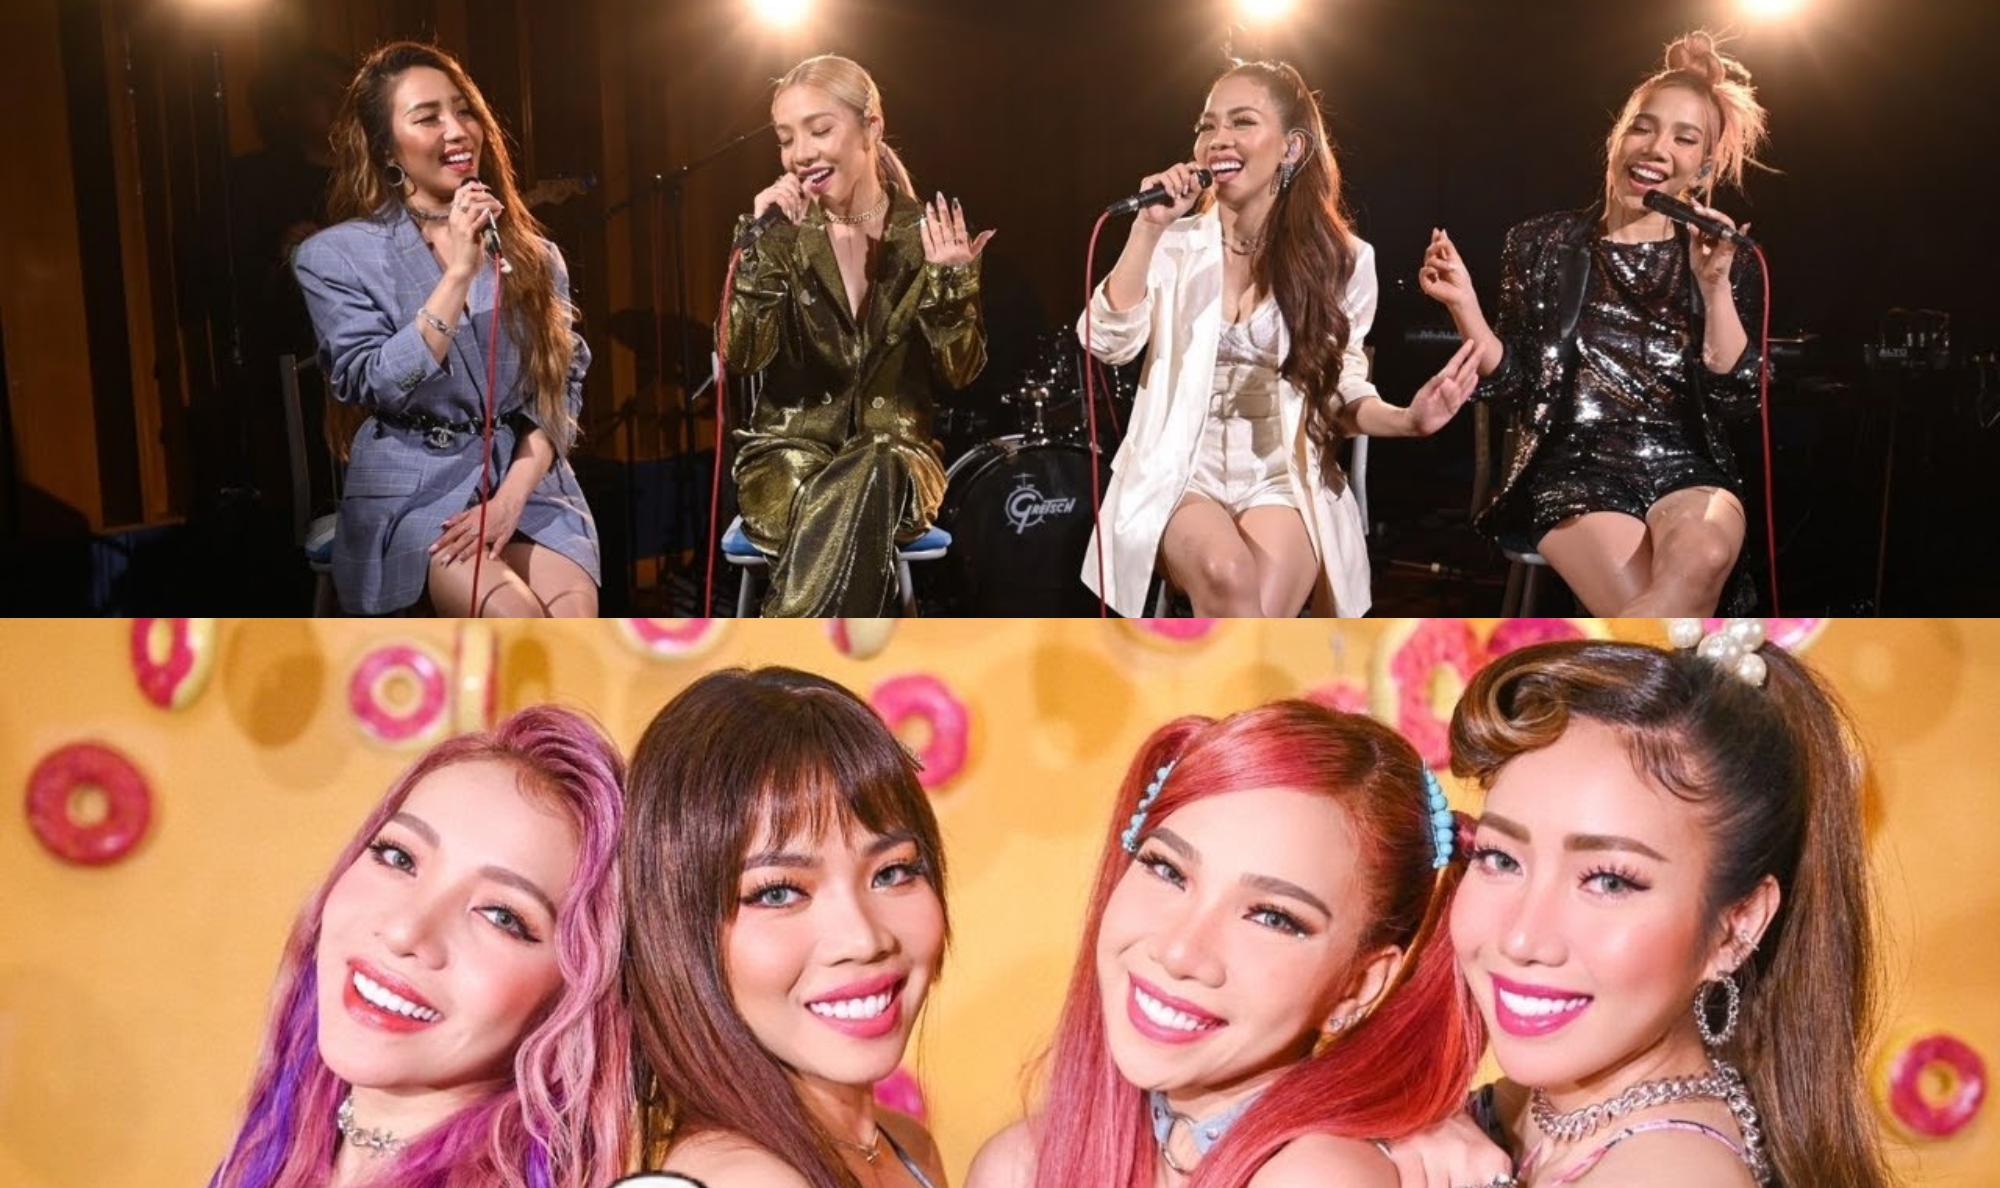 4th Impact Blows Us All Away With Session Cover Of BTS "Dynamite" Following Up Their Awesome Cover Of "Ice Cream" By BLACKPINK & Gomez -